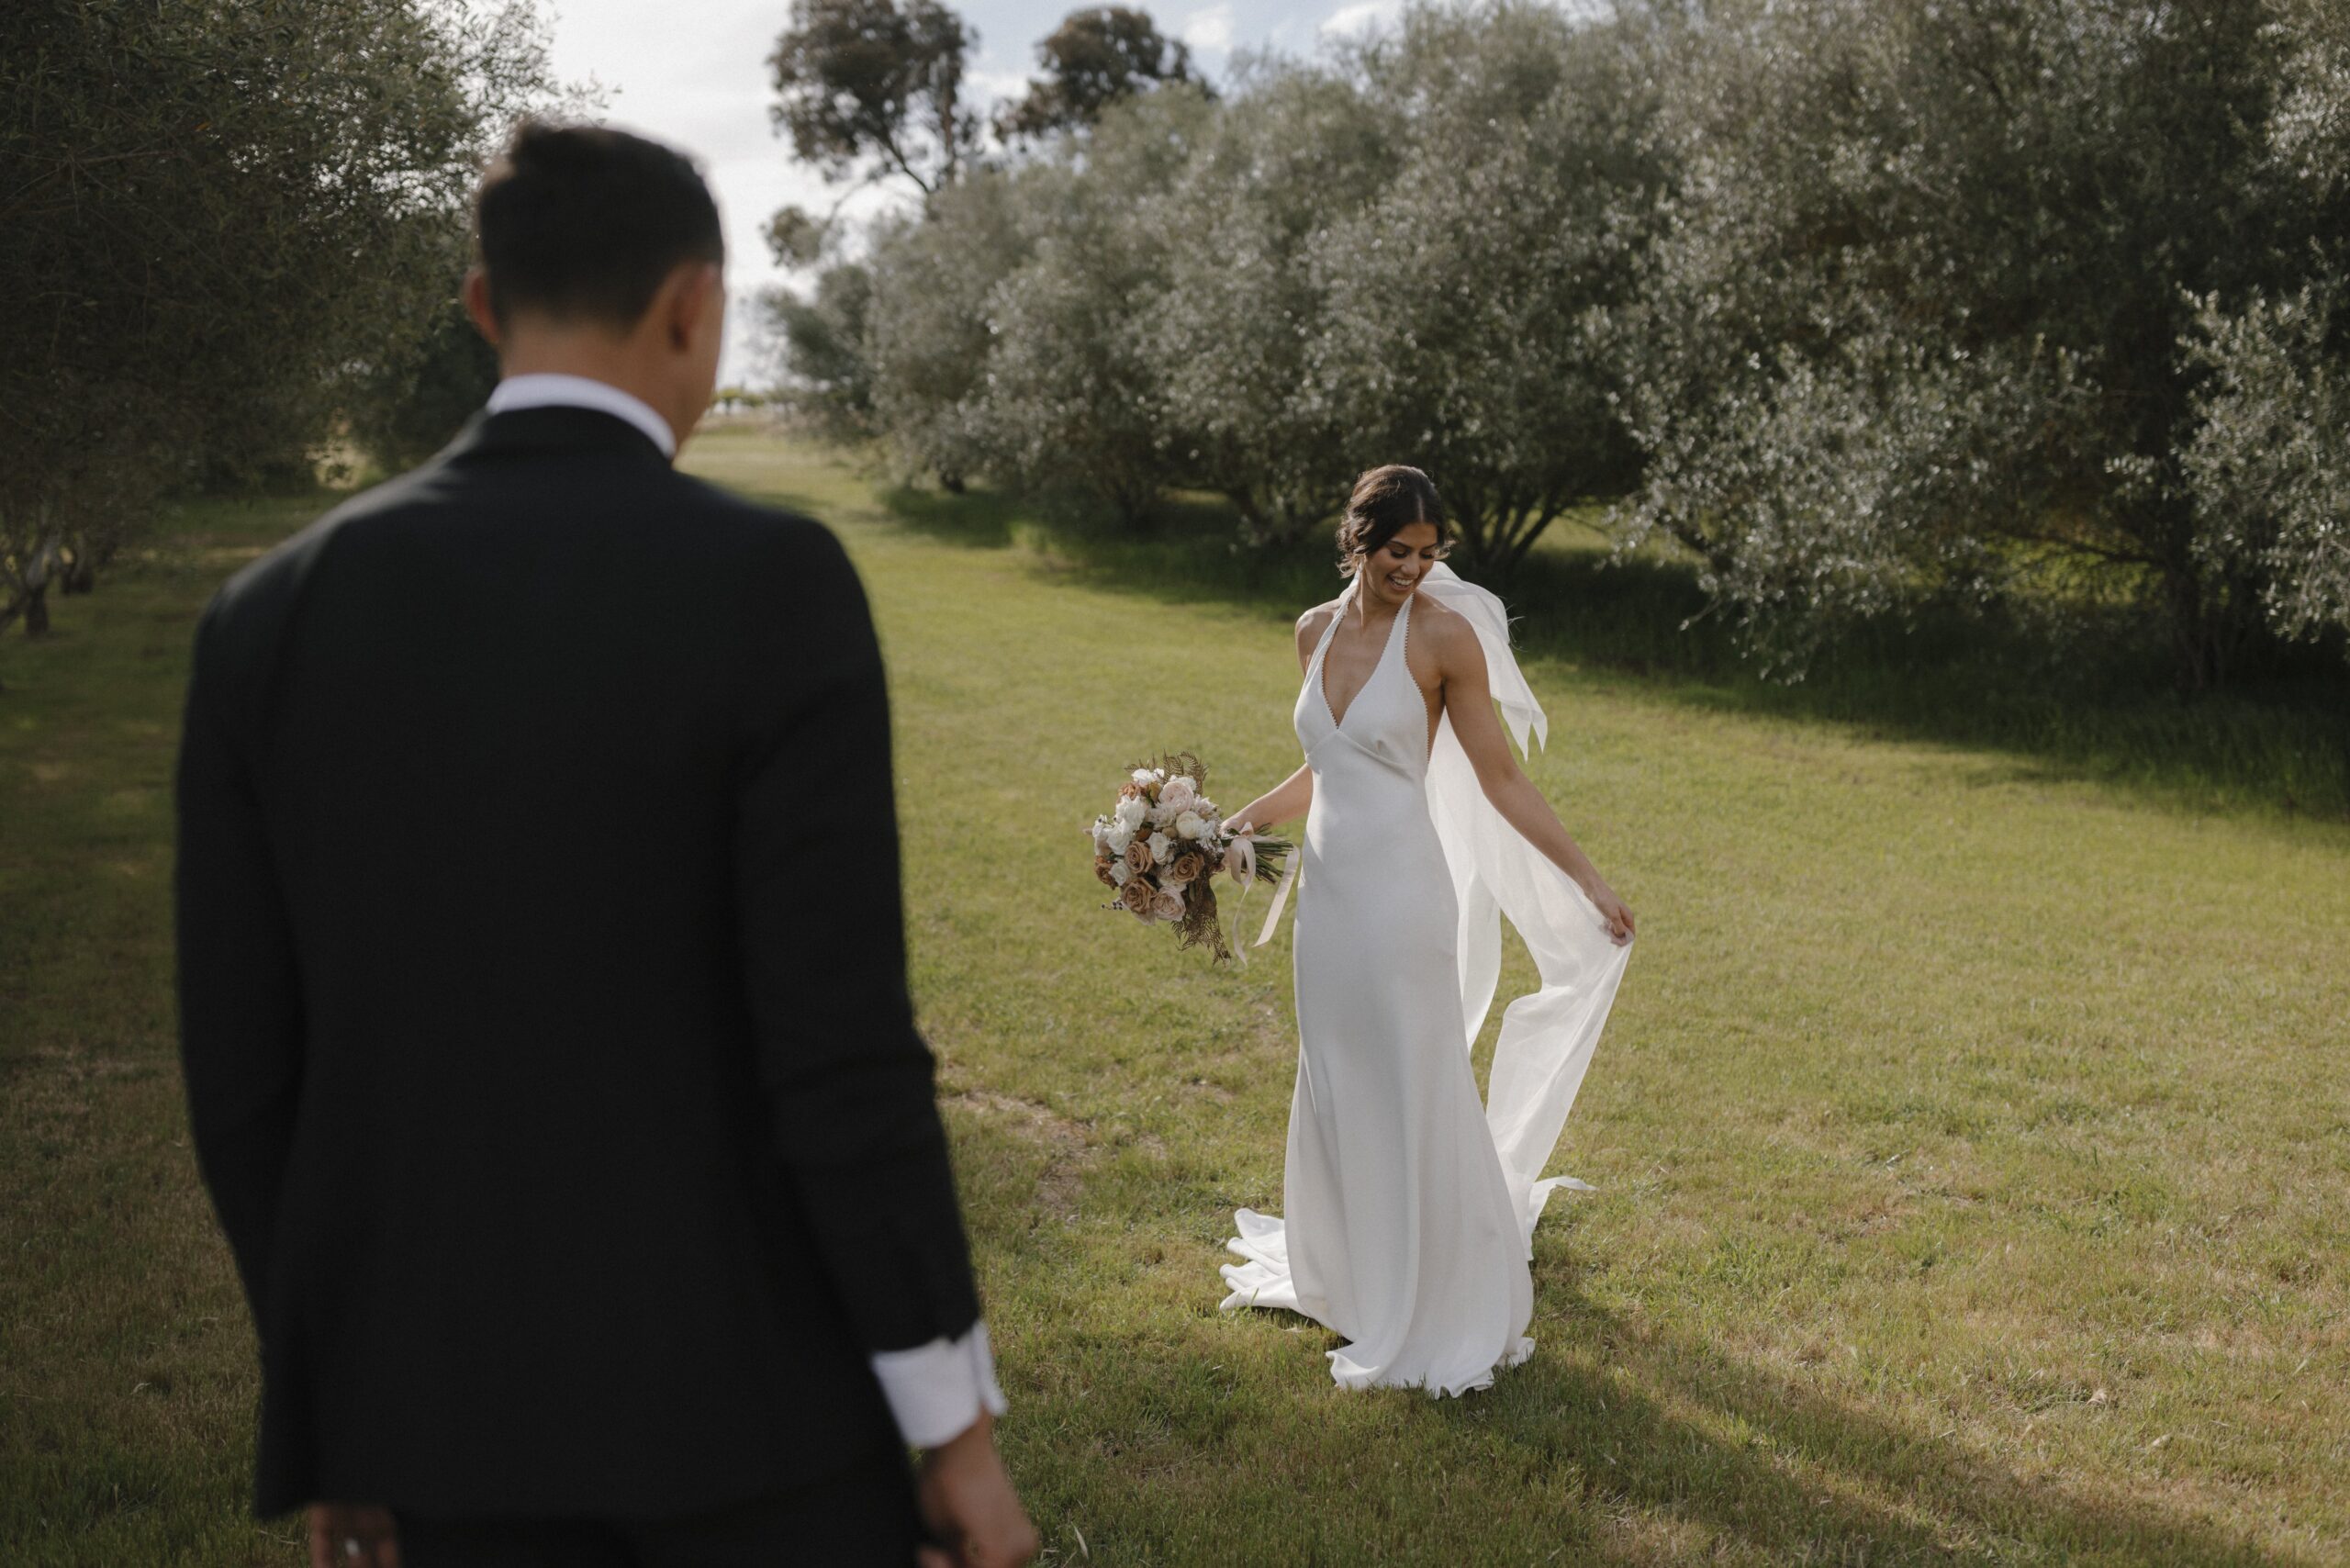 Olivia showing off her gown to Patrick amongst a backdrop of olive trees and grass